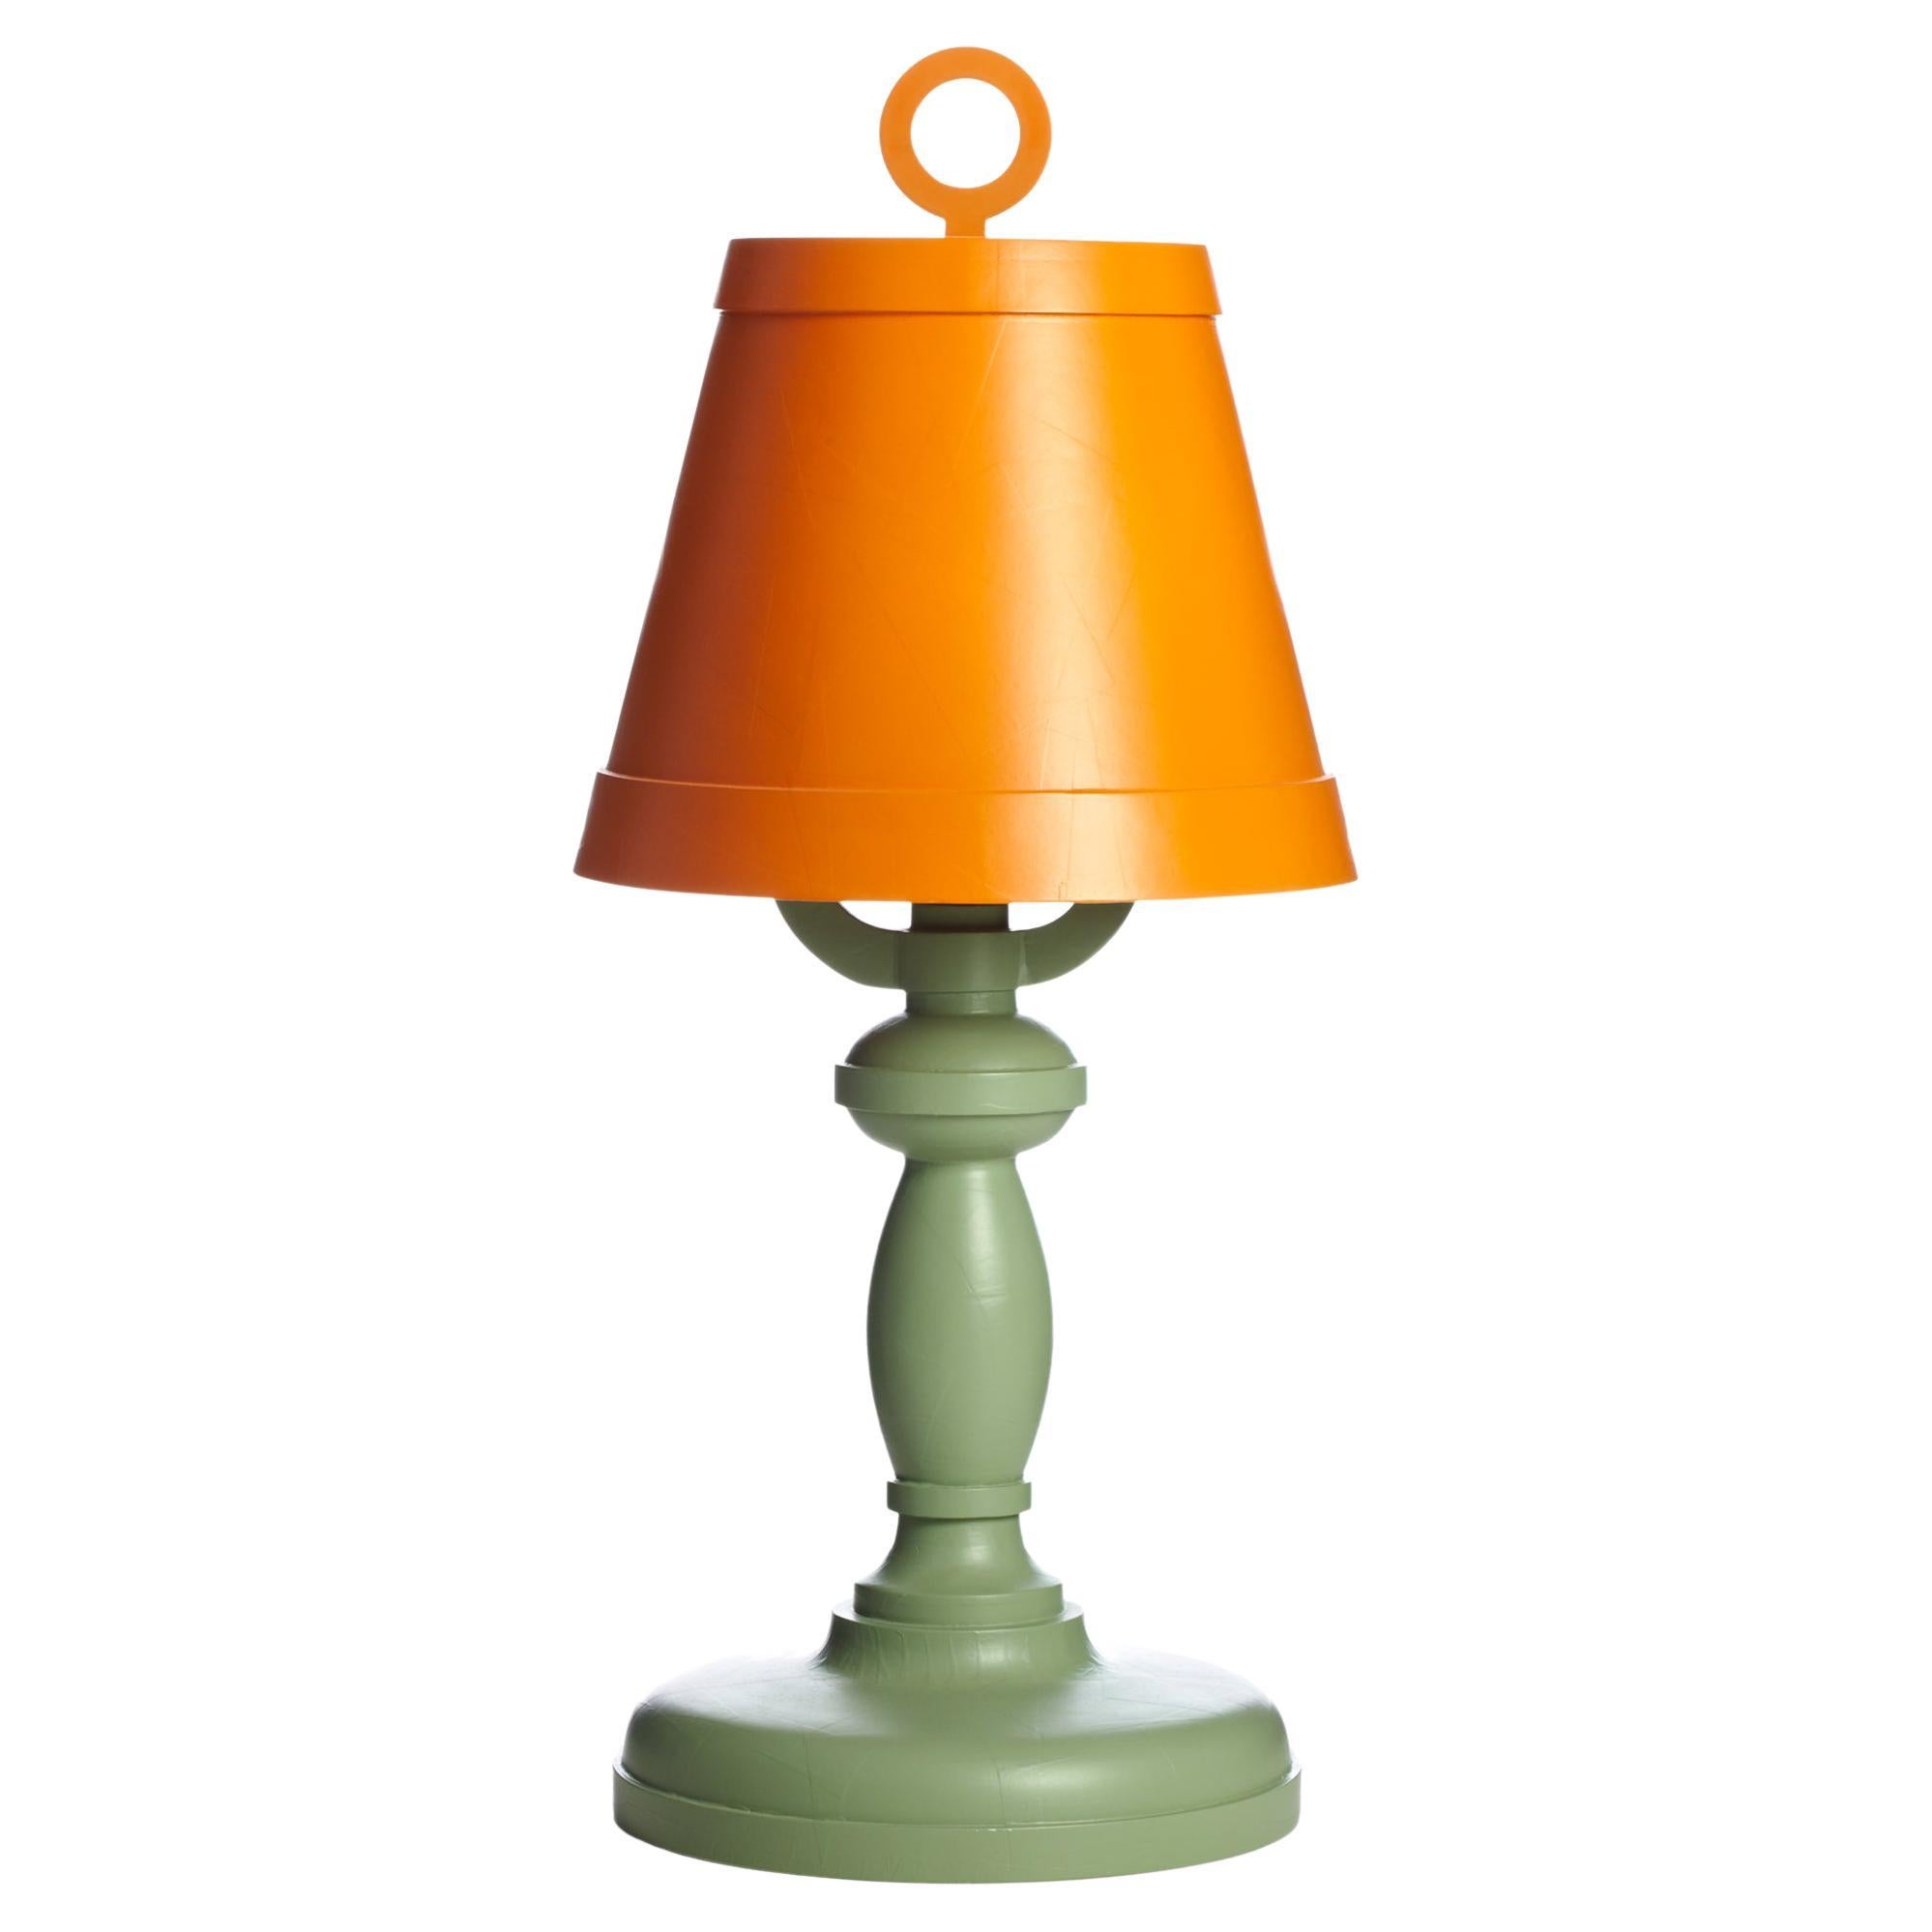 Moooi Paper Table Lamp in Orange Shade with Green Base by Studio Job